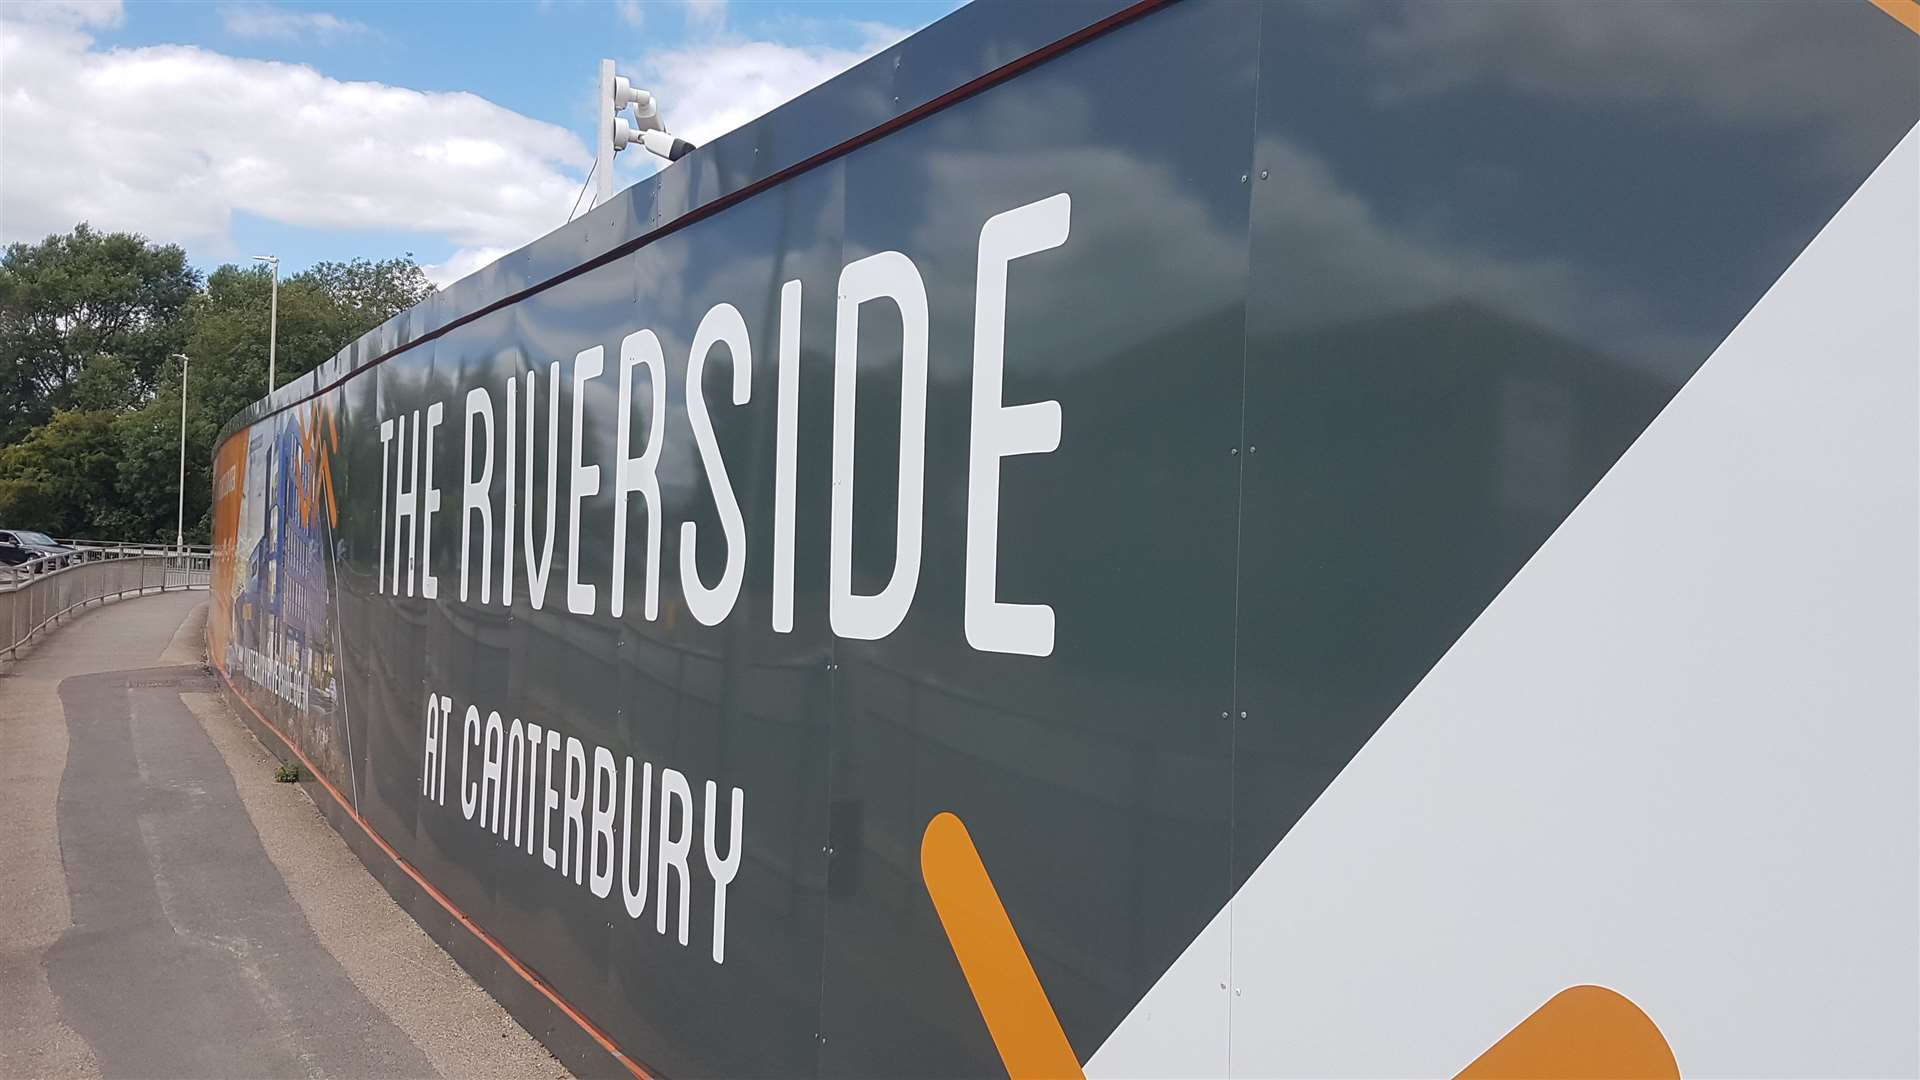 The Riverside site is due to be open next year